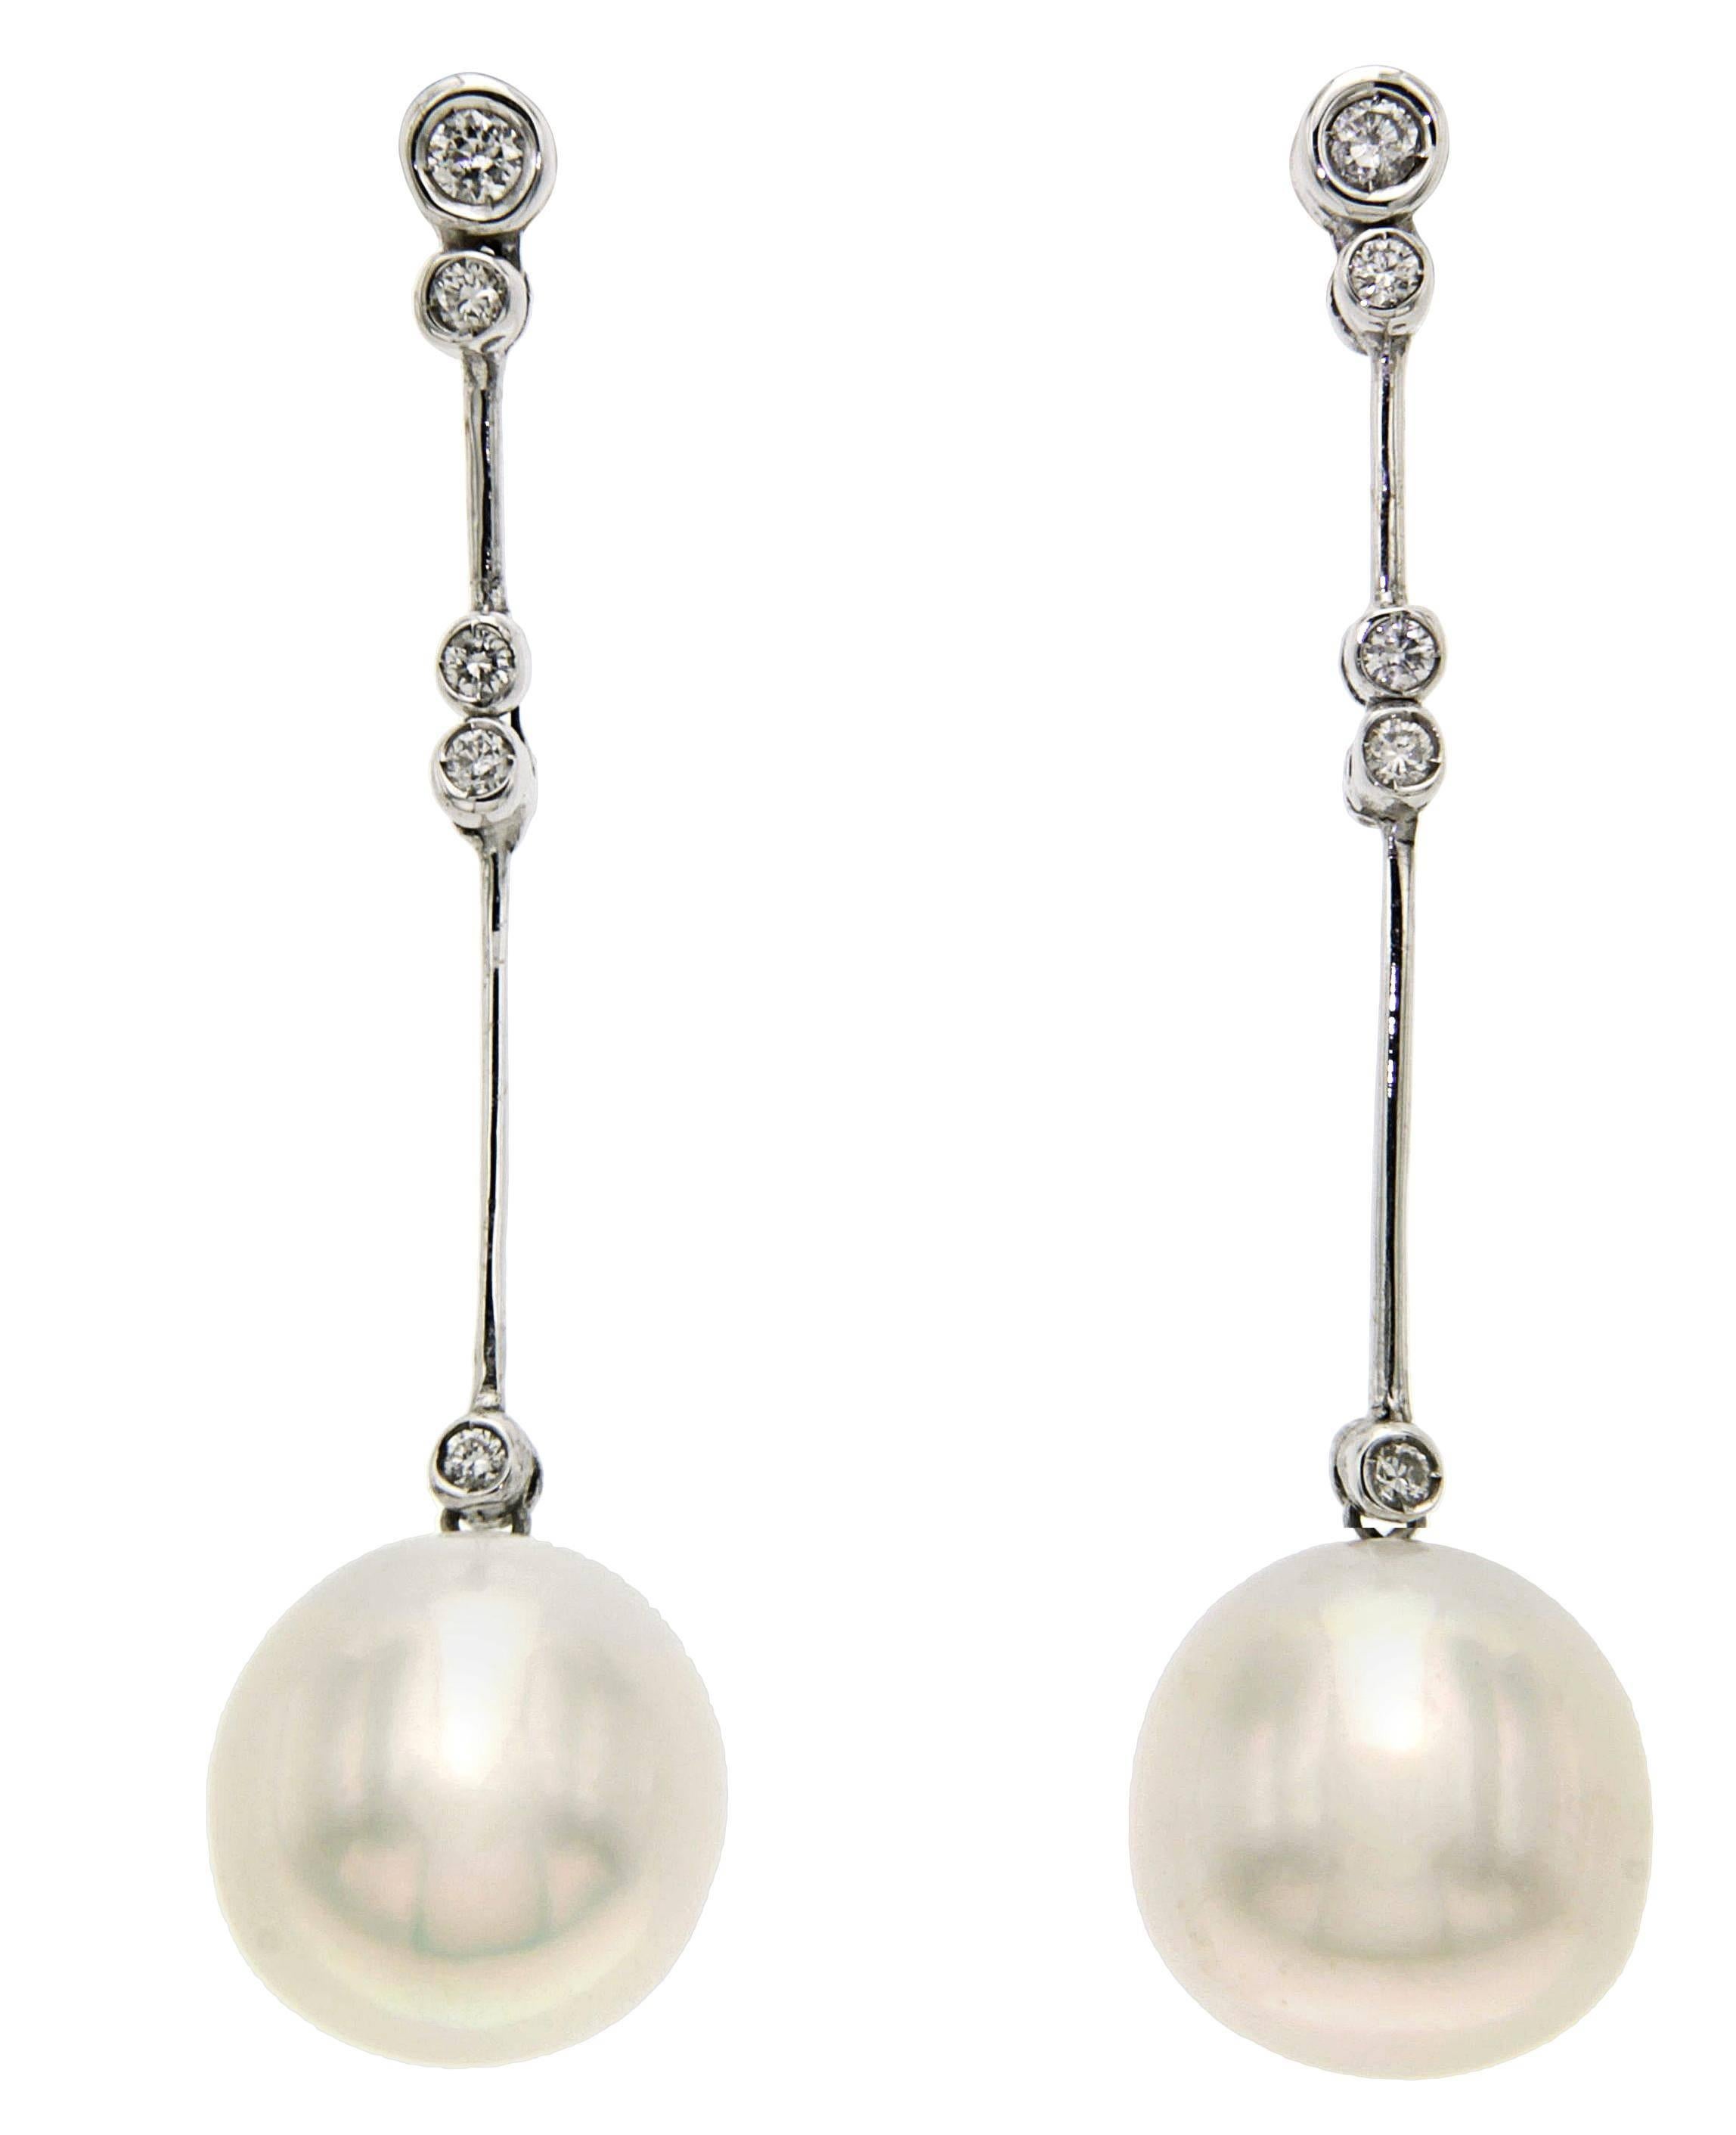 White 18k Gold Earrings with Diamonds 0.25 ctw and Australian Pearls 12 mm AA

Total length 5 cm